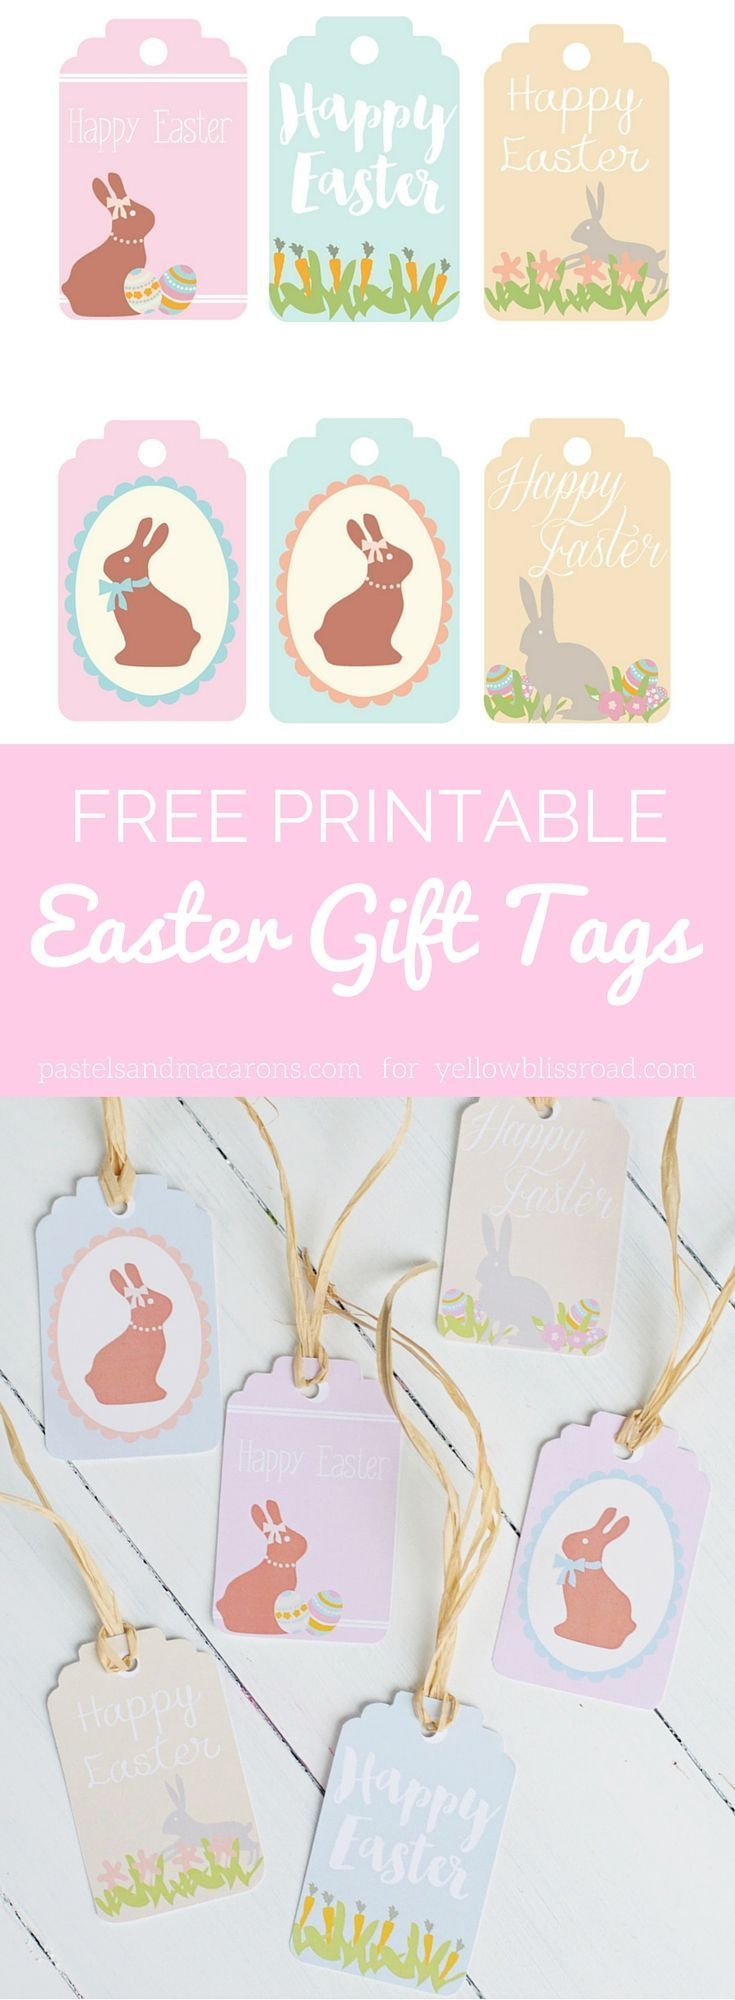 Free Printable Easter Gift Tags Easter Printables Free Easter Gift Tag Easter Gift